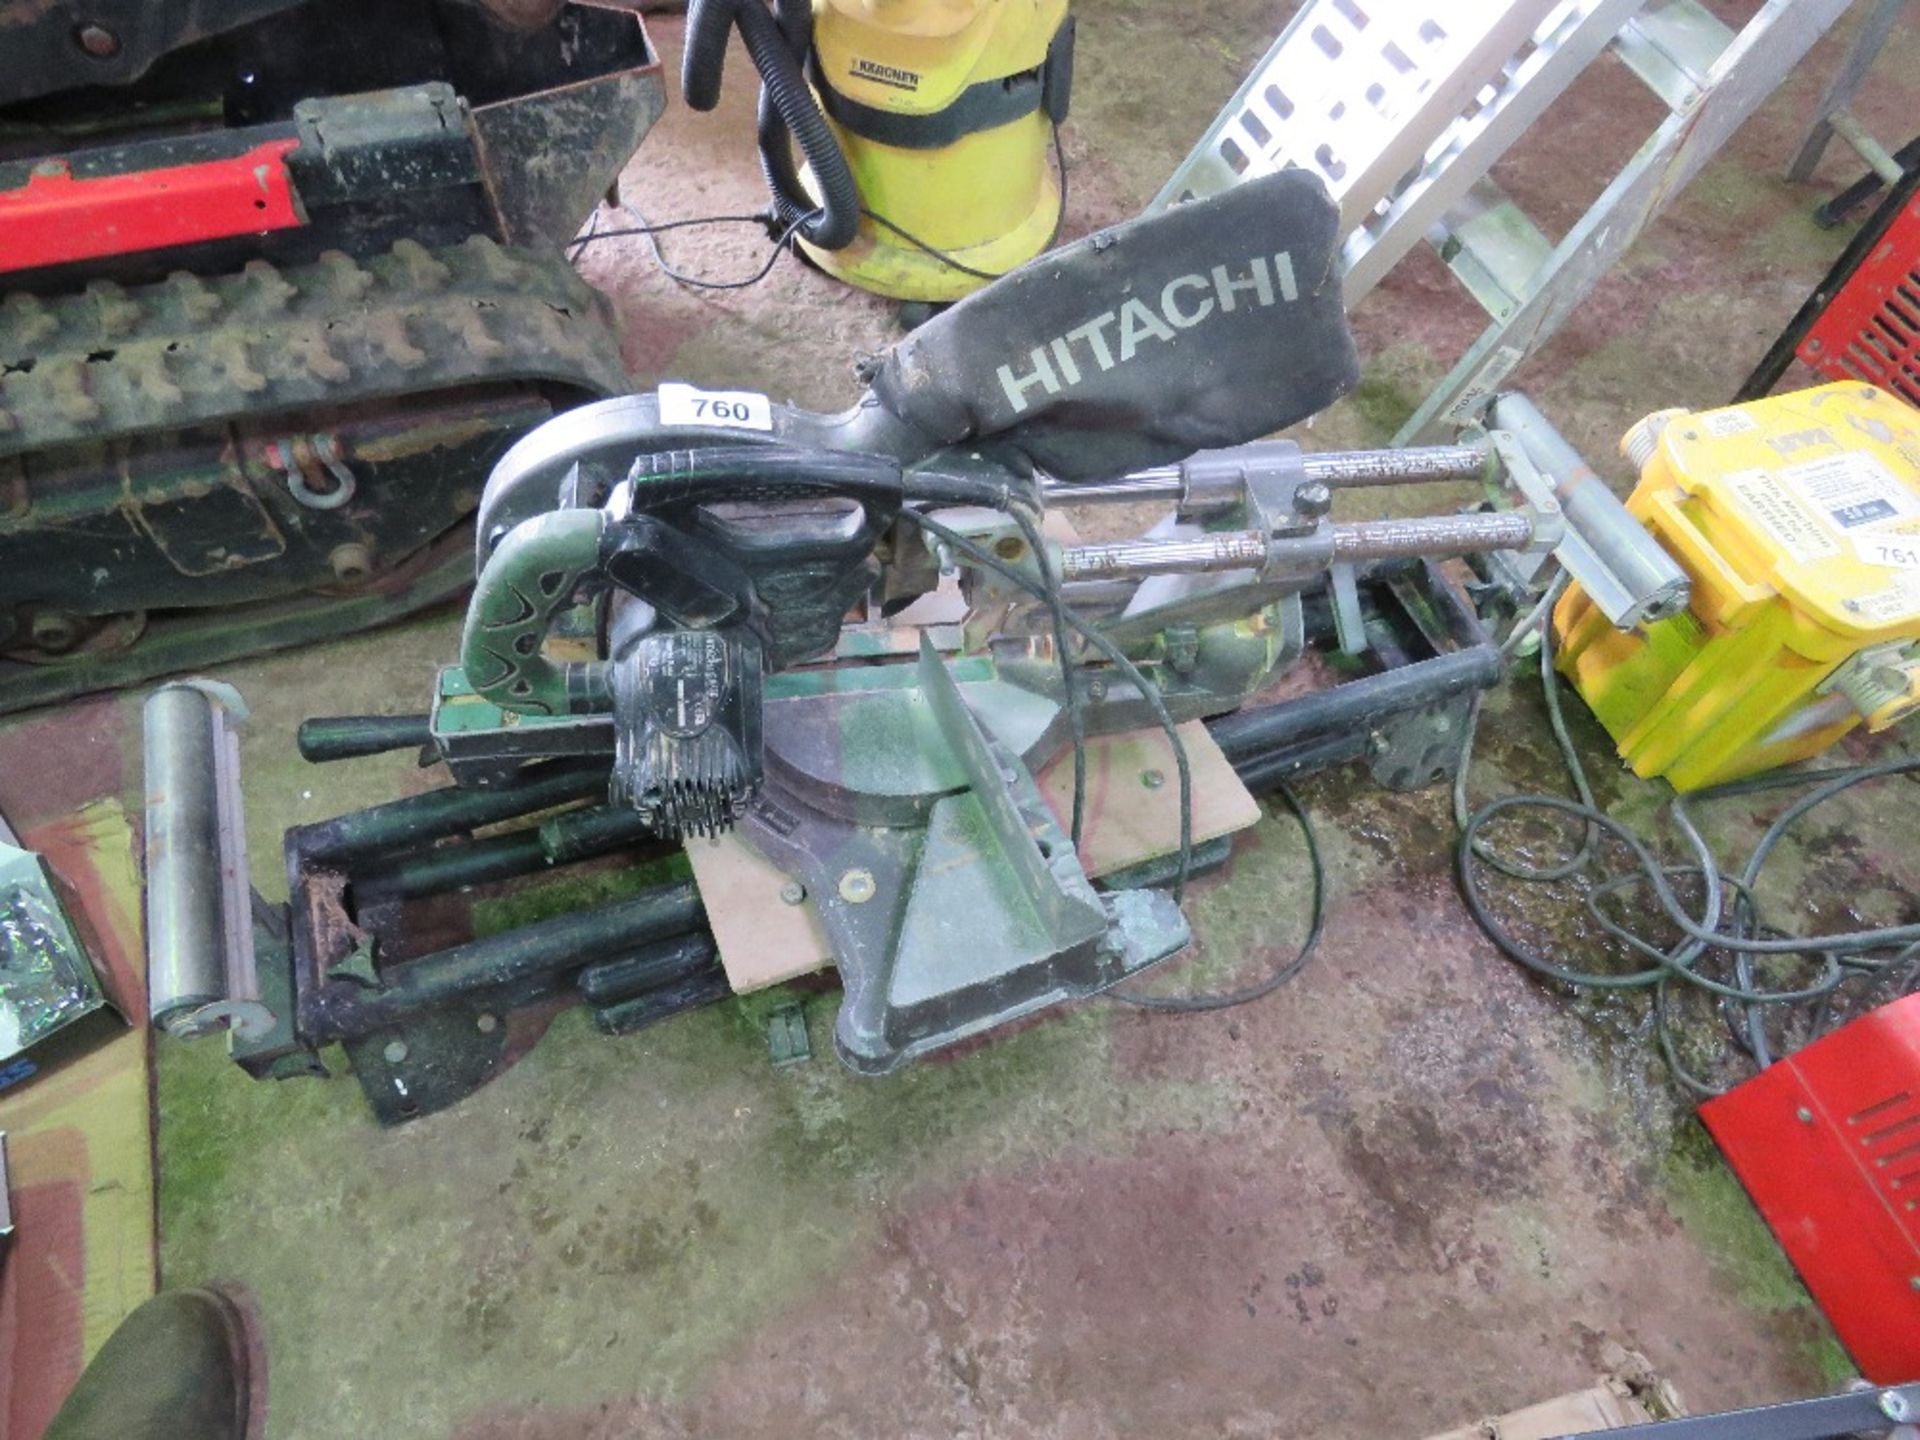 HITACHI 240VOLT POWERED CROSS CUT MITRE SAW PLUS STAND. OWNER RETIRING AND EMMIGRATING. THIS LOT I